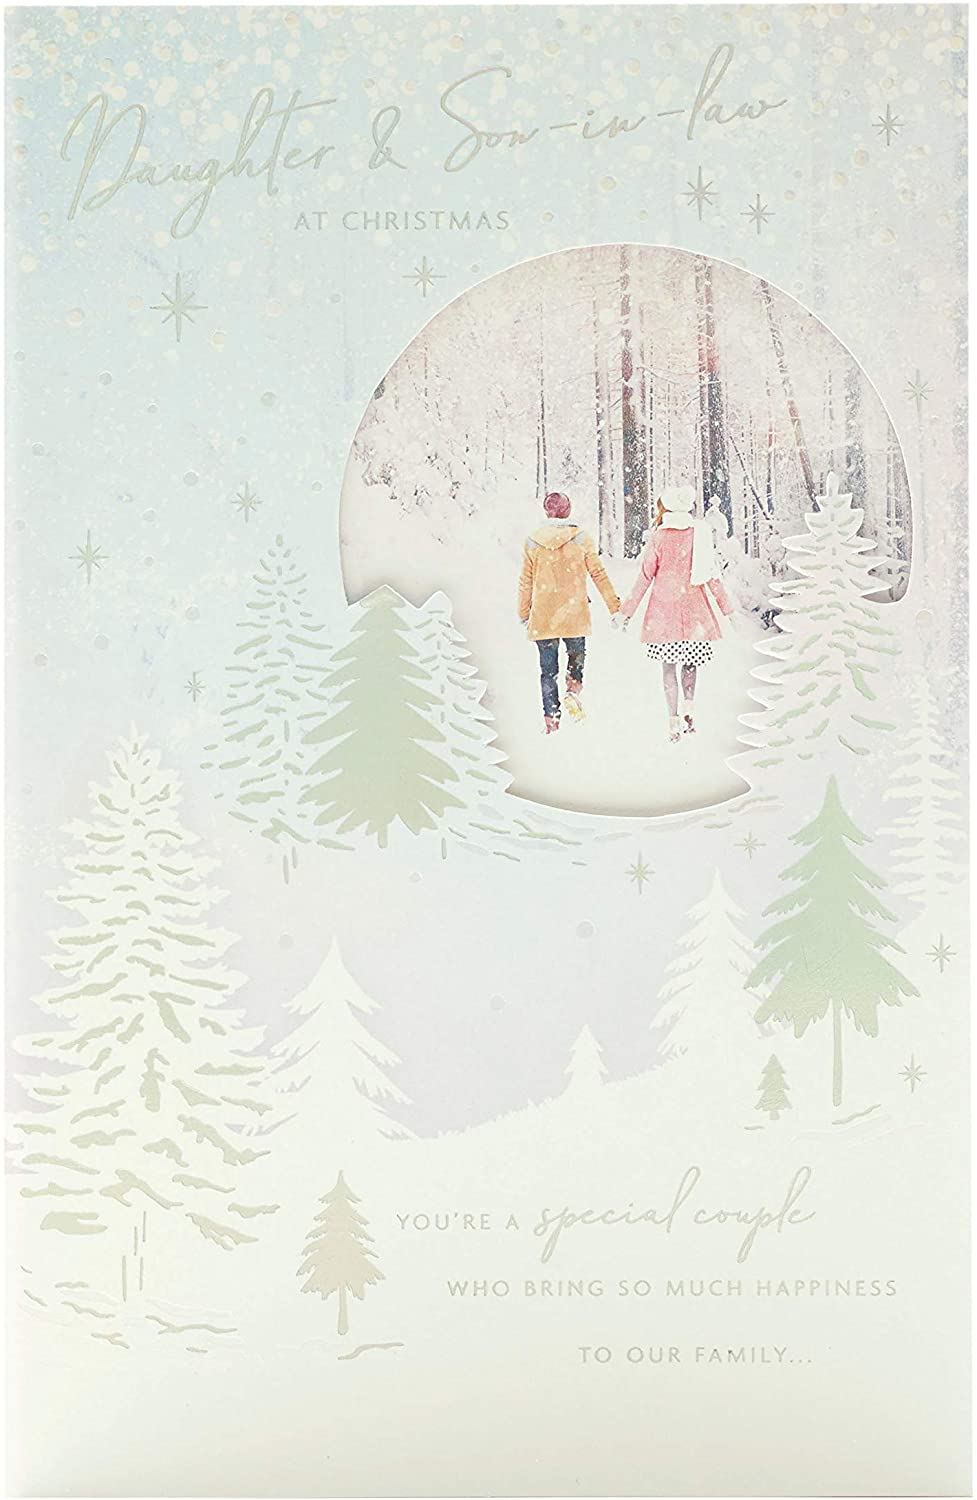 Daughter and Son in Law Christmas Card Beautiful Winter Scenery Design 